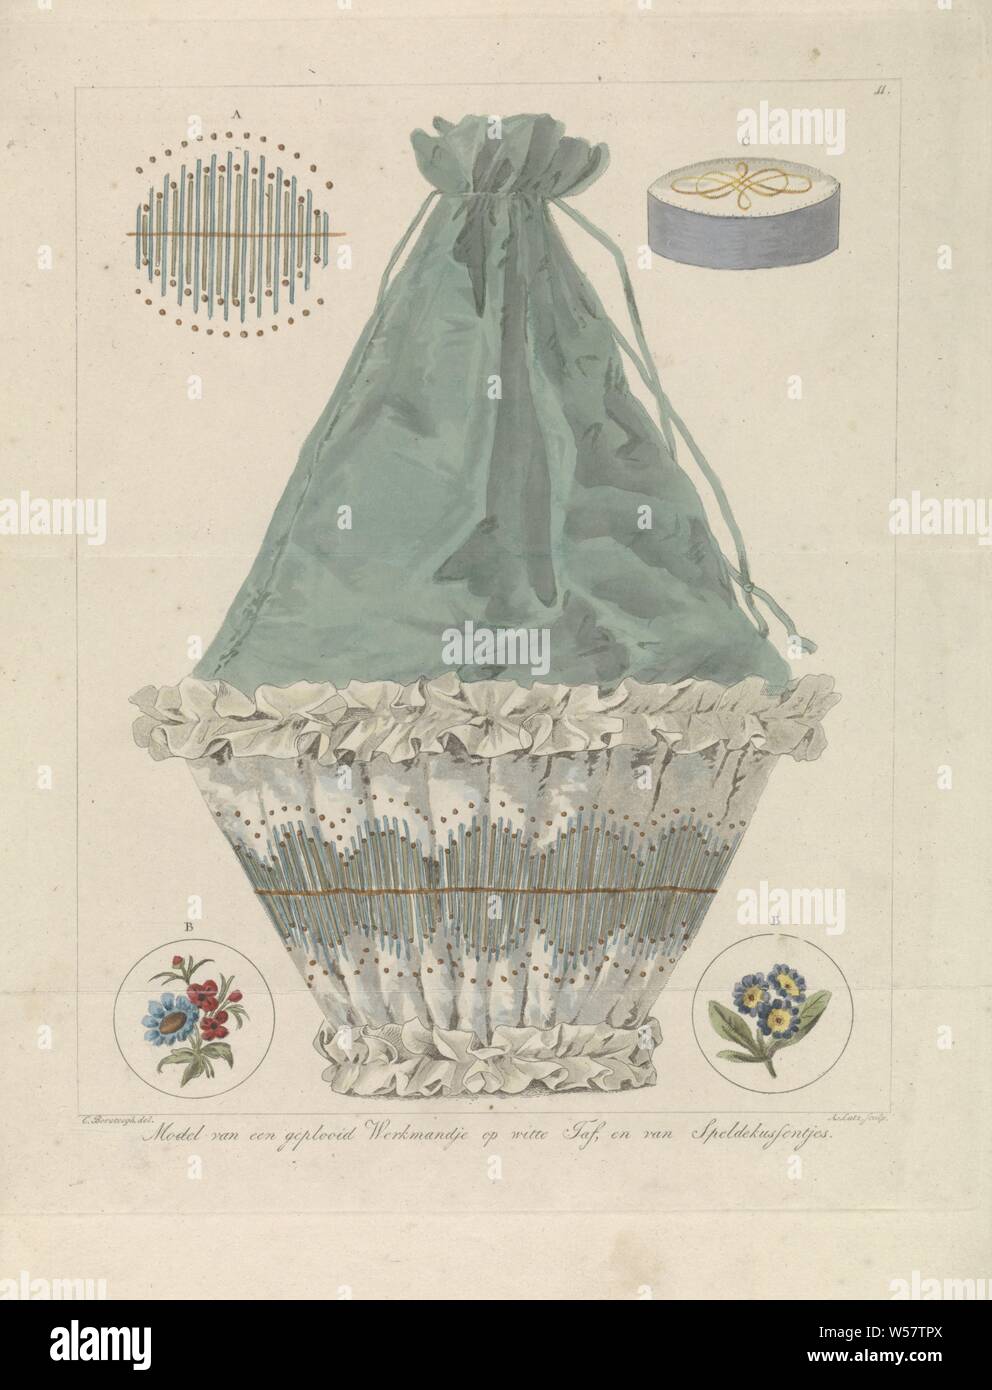 Model of a folded work basket and pin cushions, Model of a folded work basket and pin cushions. Print numbered top right: 11, container made or plant material other than wood: basket, A. Lutz (mentioned on object), The Hague, 1809 - 1822, paper, brush, h 261 mm × w 219 mm Stock Photo